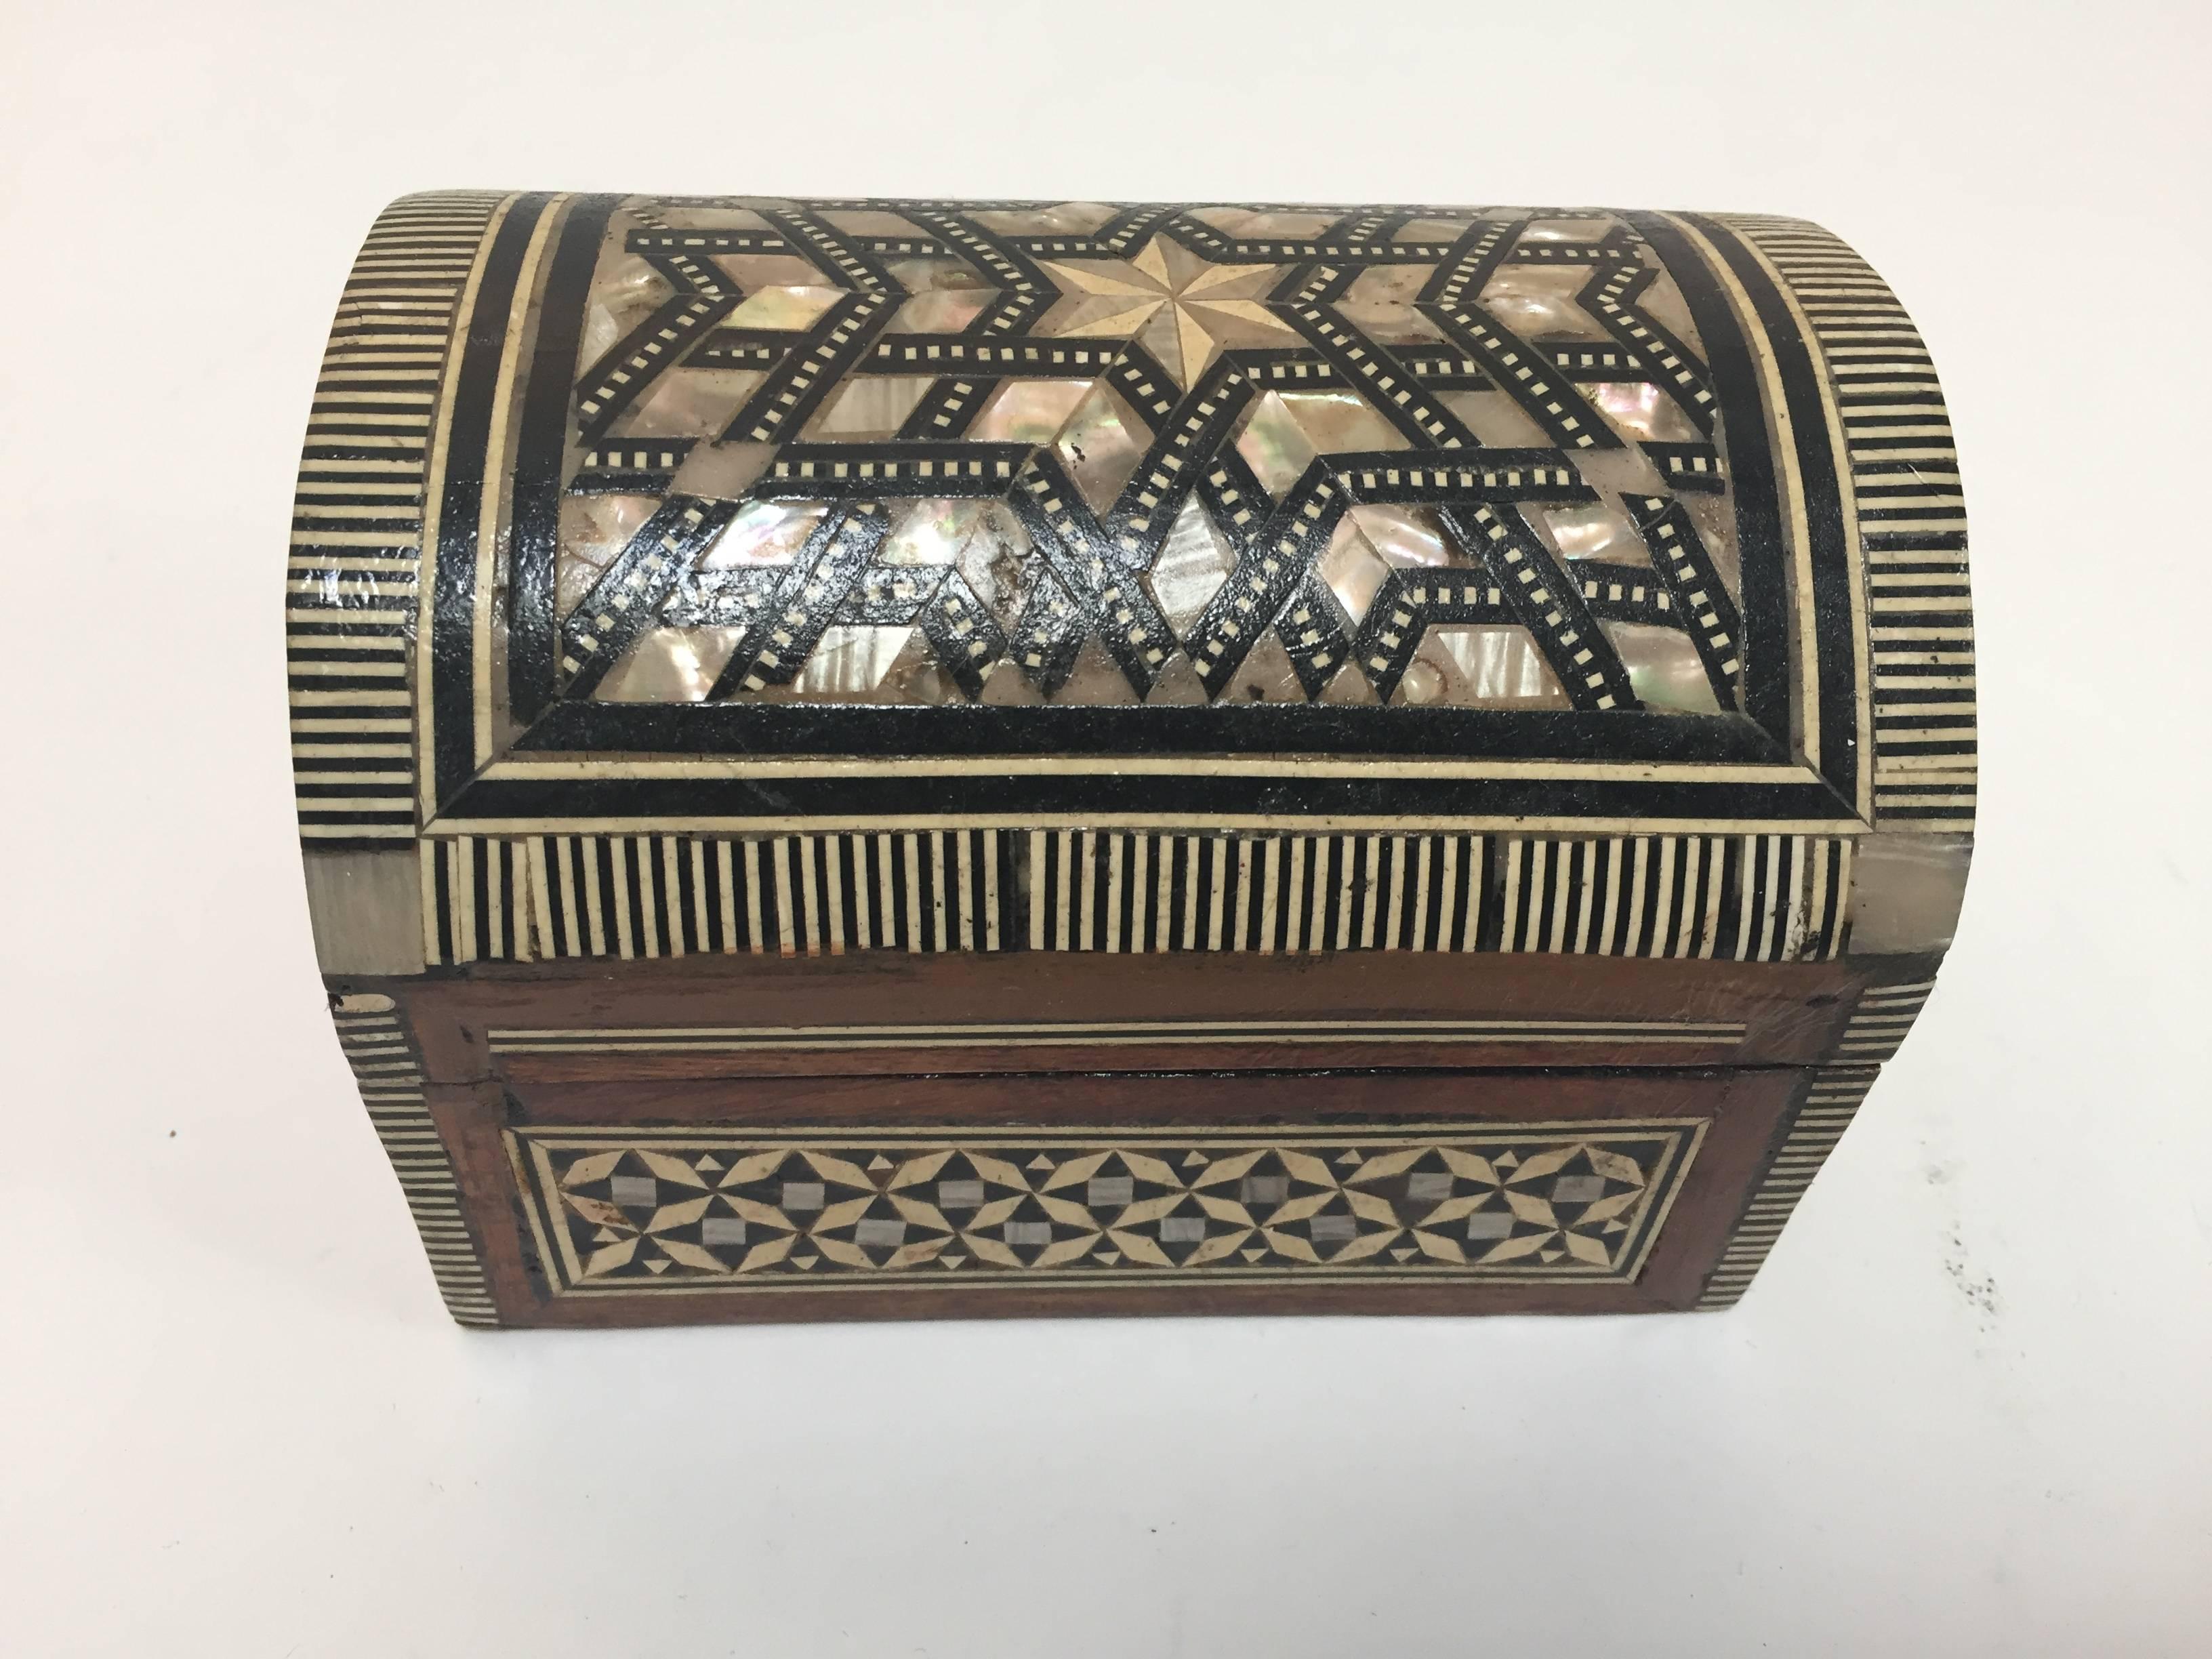 Exquisite handcrafted Middle Eastern Syrian mother-of-pearl inlaid walnut wood jewelry box.
Small dome chest intricately decorated with Moorish motif designs which have been painstakingly inlaid with mother-of-pearl and marquetry in different